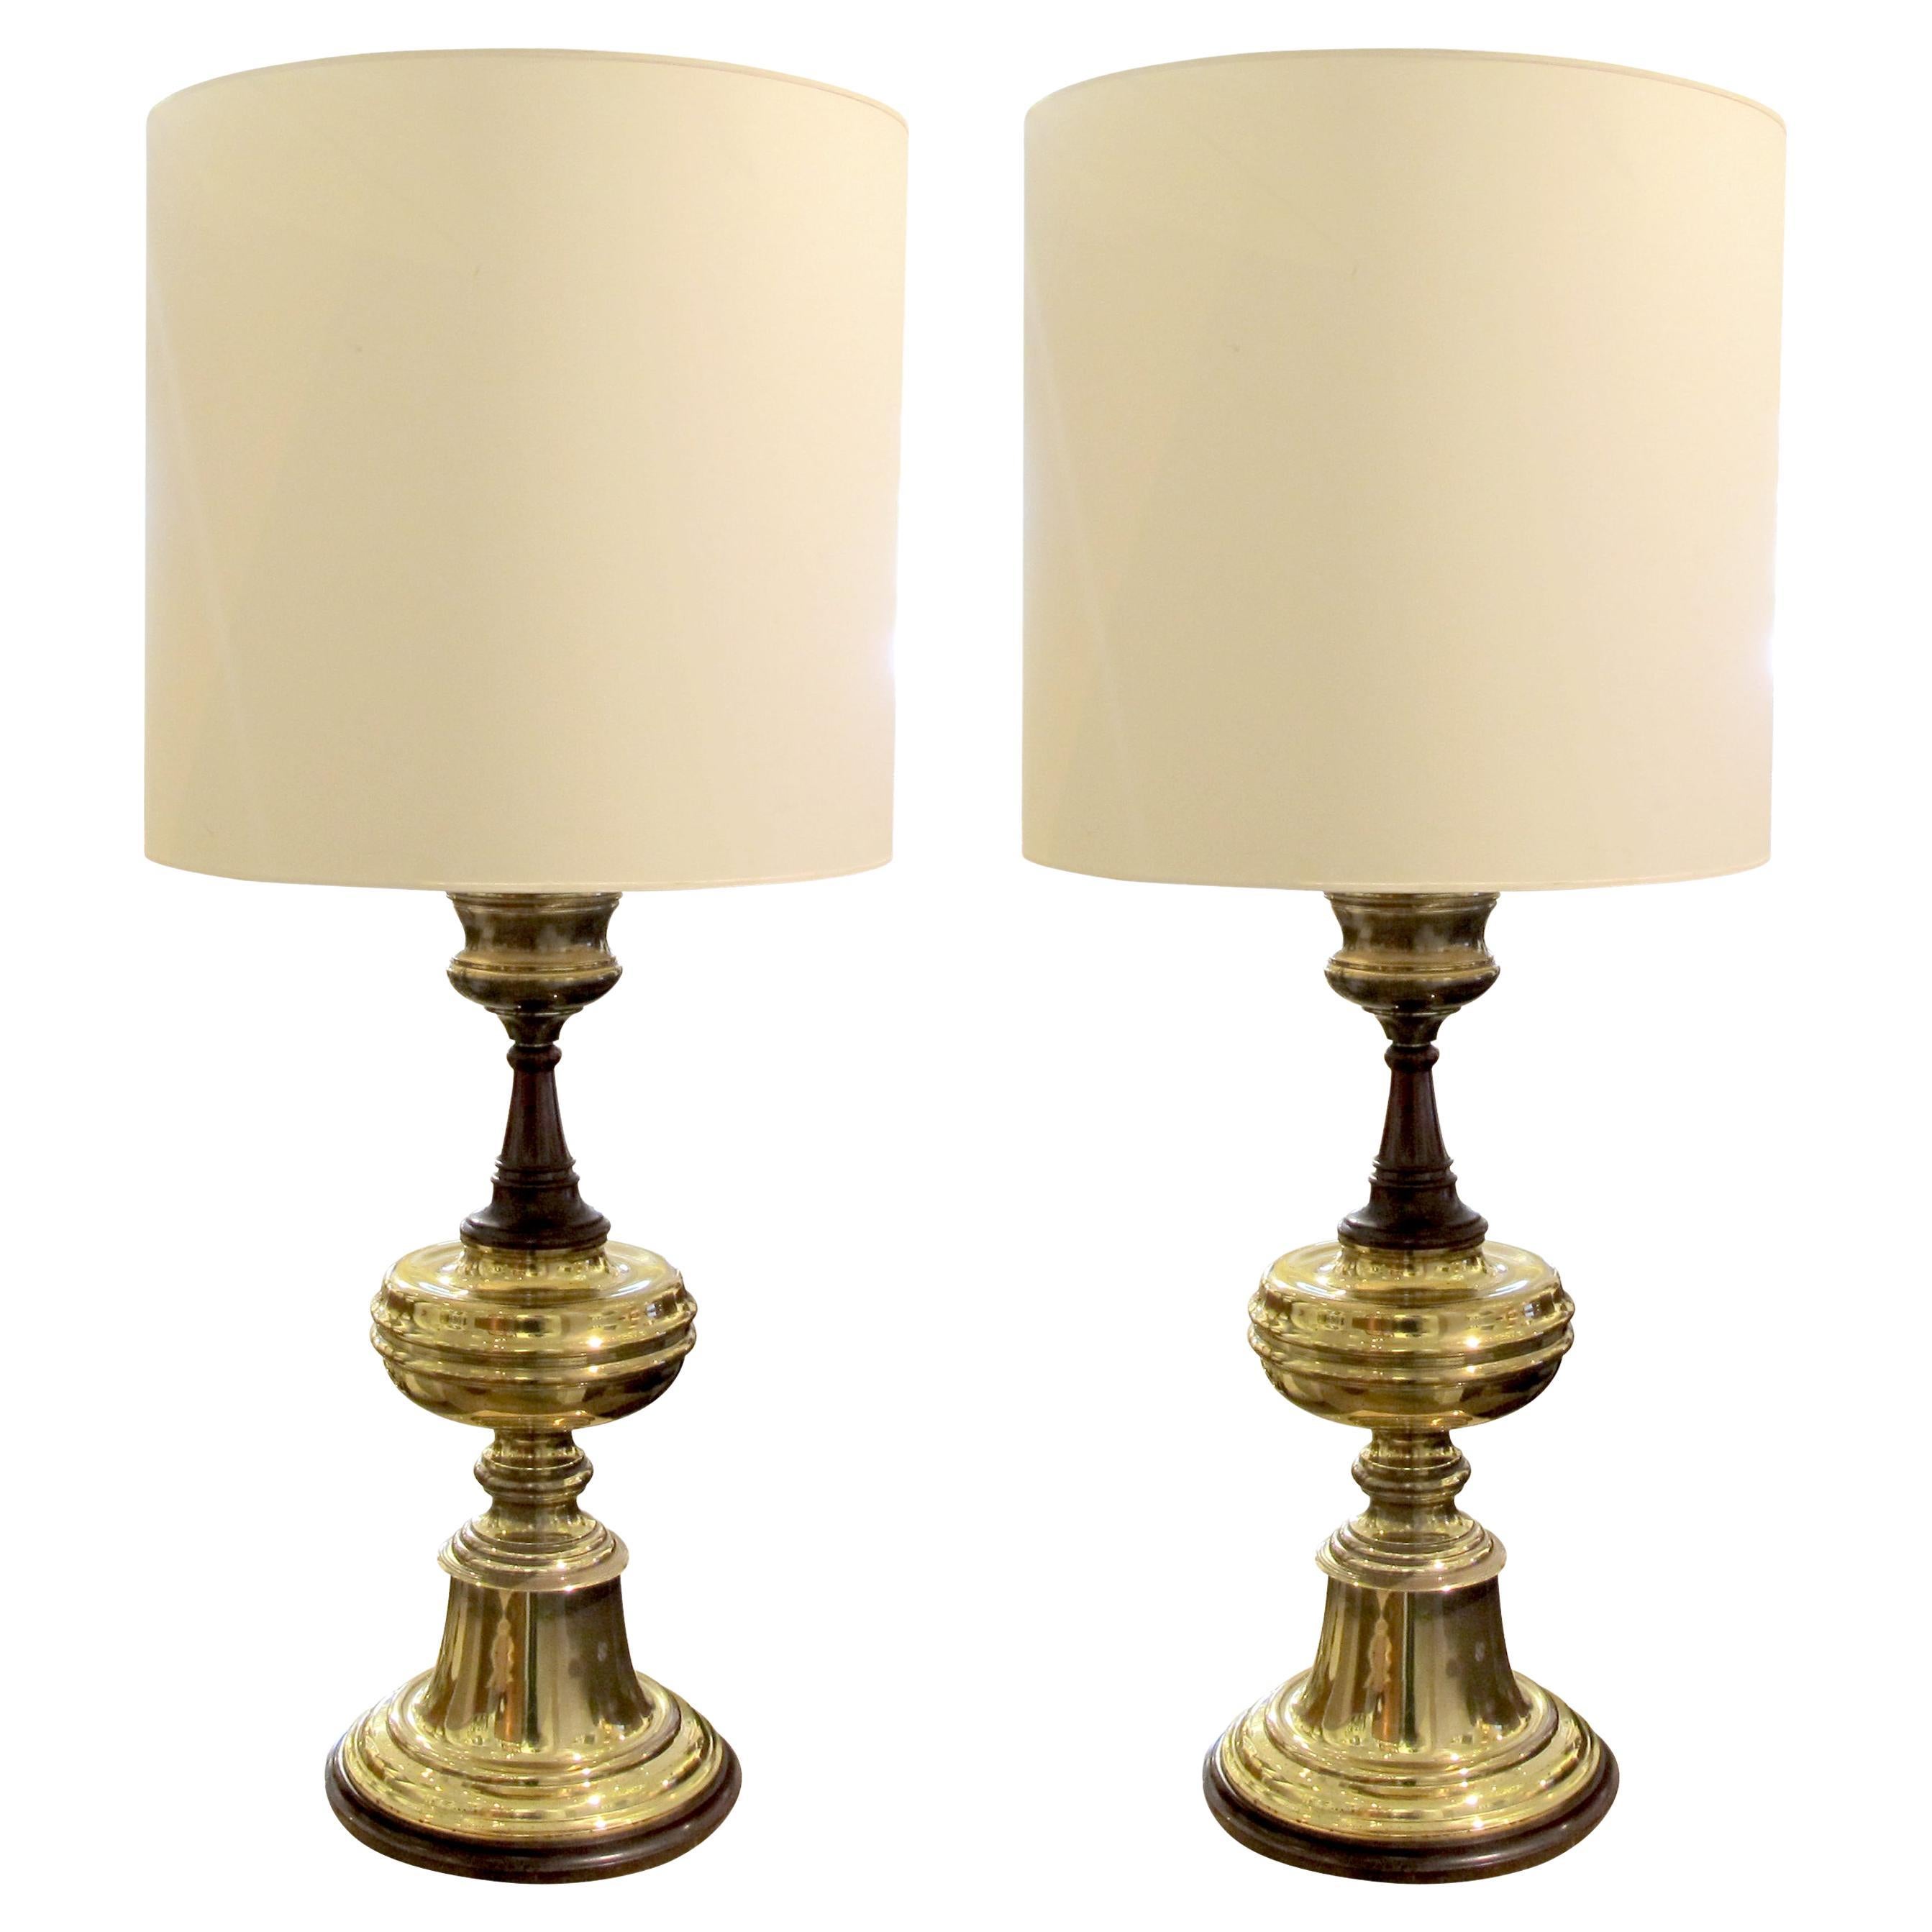 1950s Very Large Pair of Brass and Wood Tables lamps, English